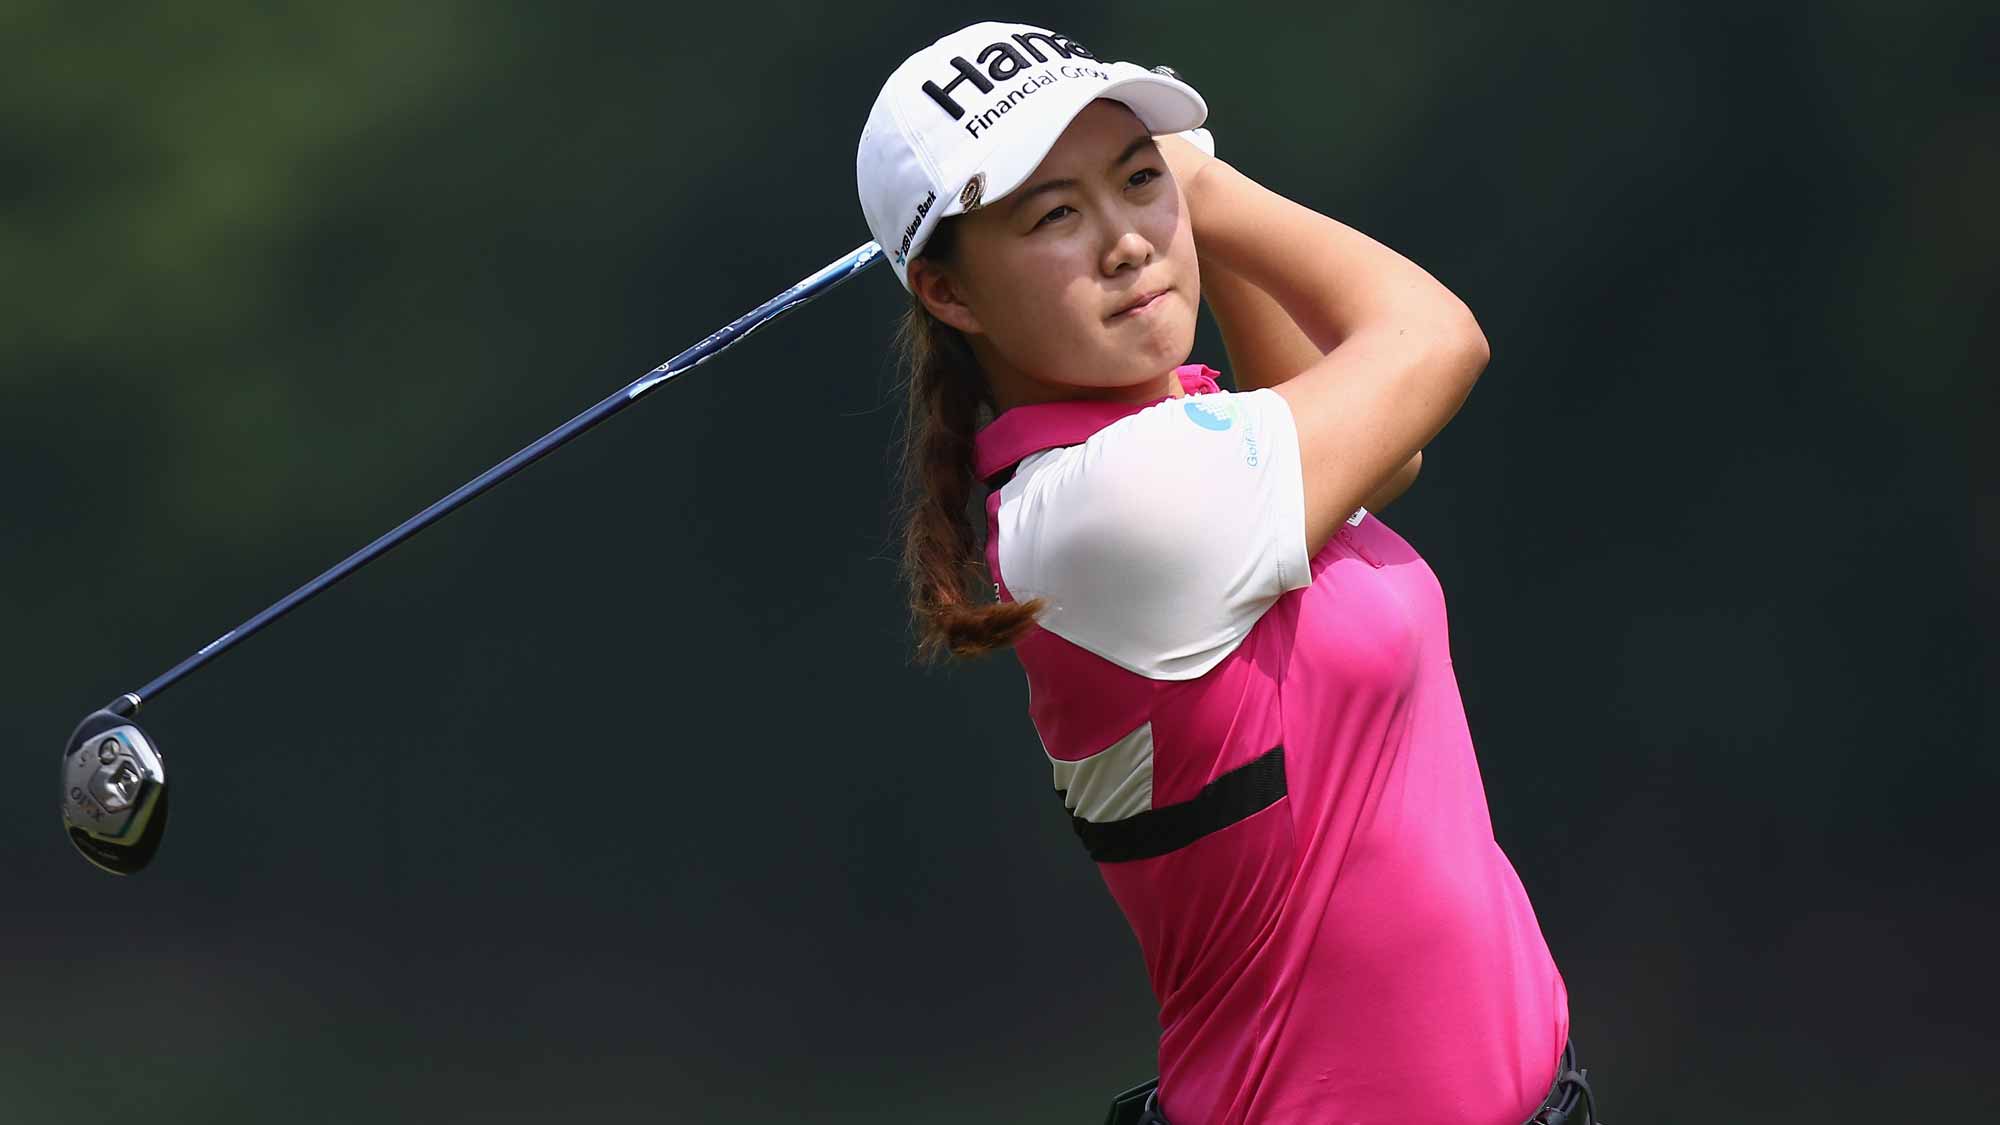 Minjee Lee of Australia watches her 2nd shot on the 6th hole during round one of the Sime Darby LPGA Tour at Kuala Lumpur Golf & Country Club